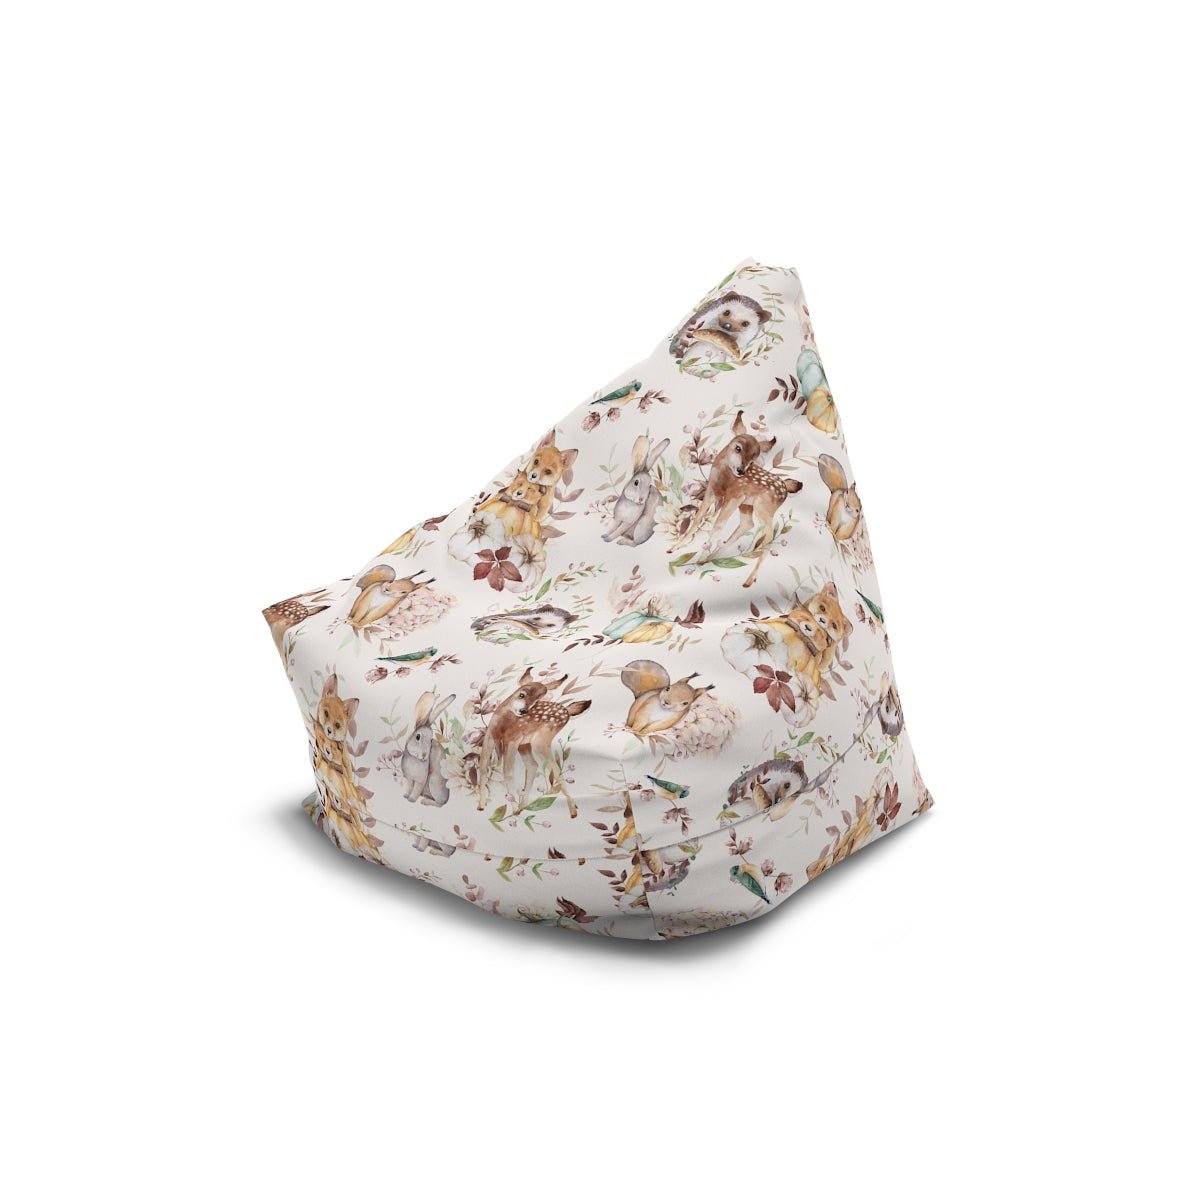 Woodland Animals Bean Bag Chair Cover - Puffin Lime